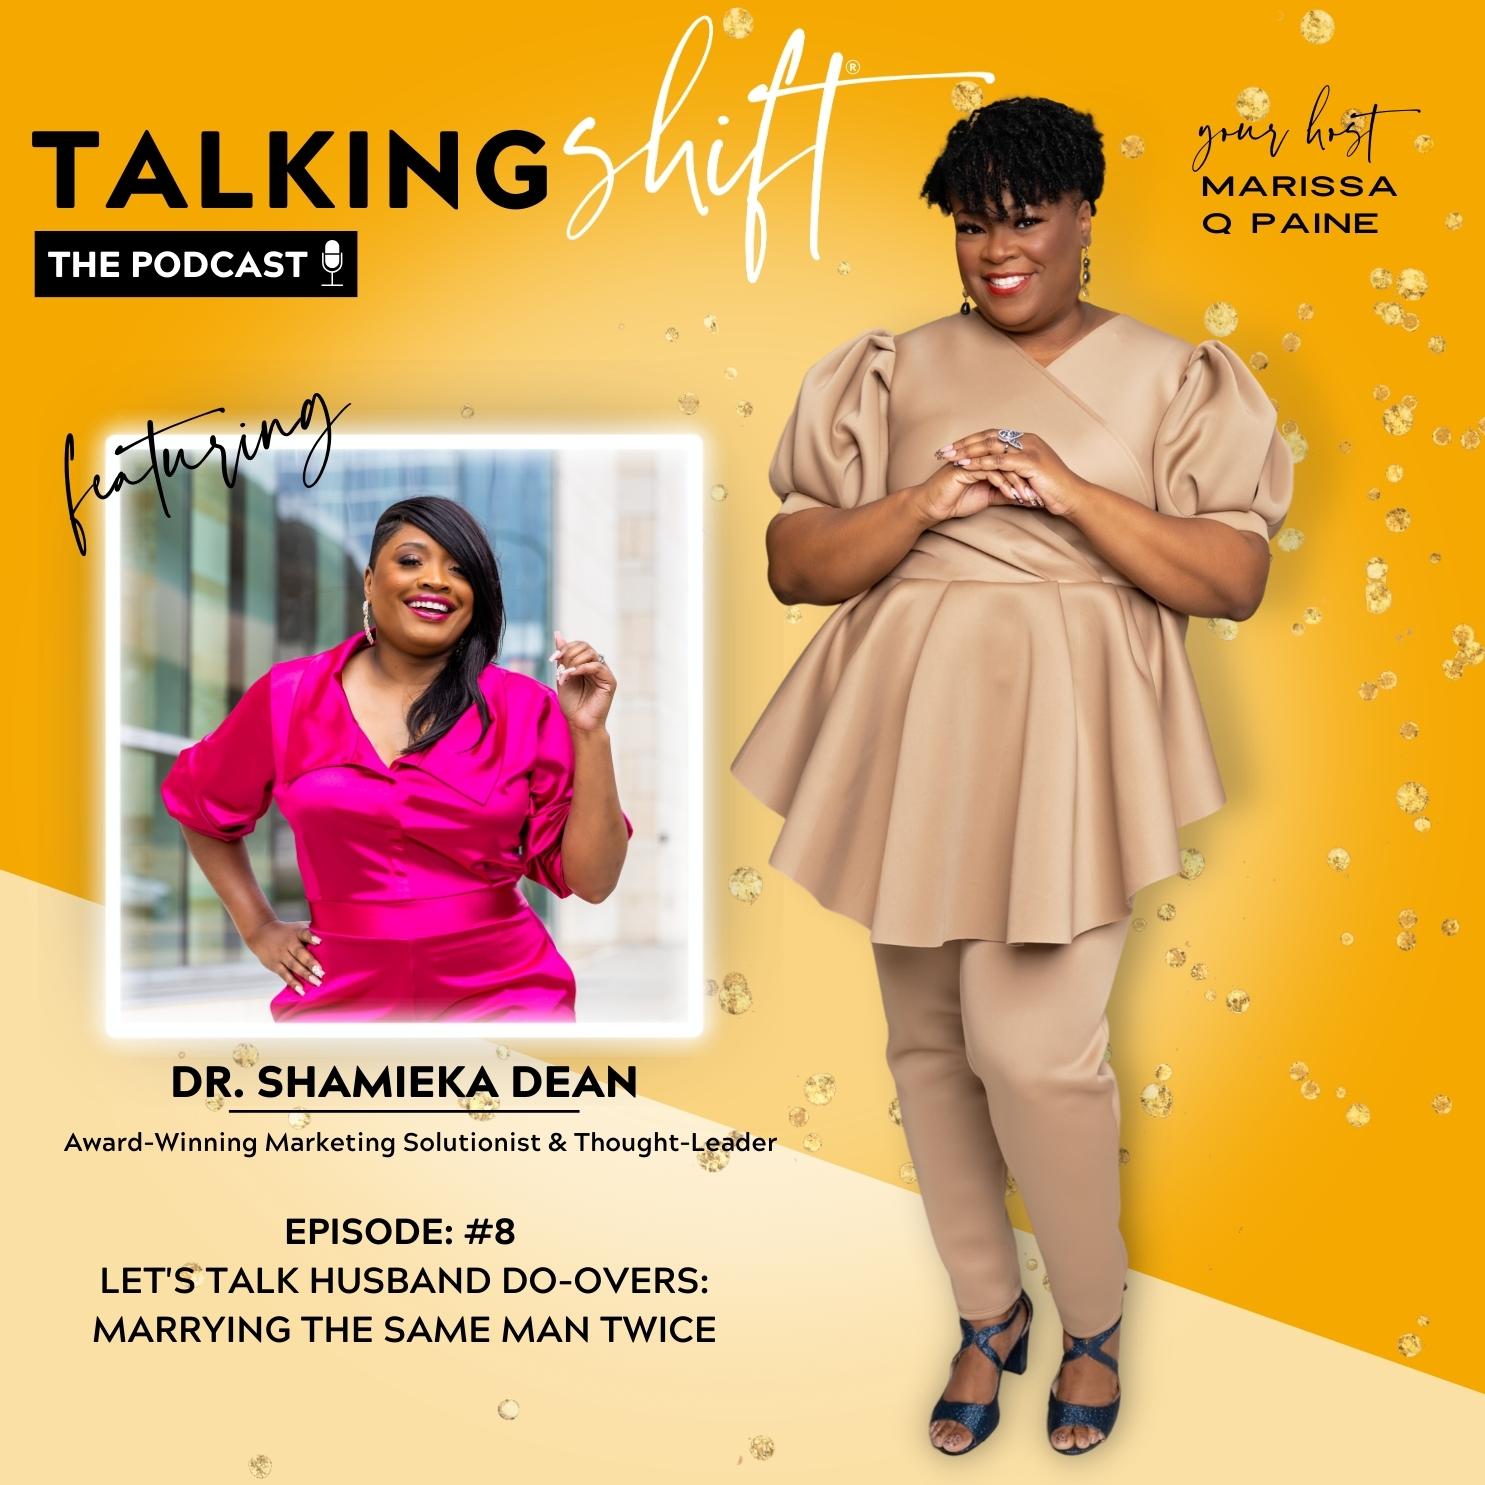 S3-EP08-Let’s Talk Husband Do-Overs: Marrying the Same Man Twice with Dr. Shamieka Dean